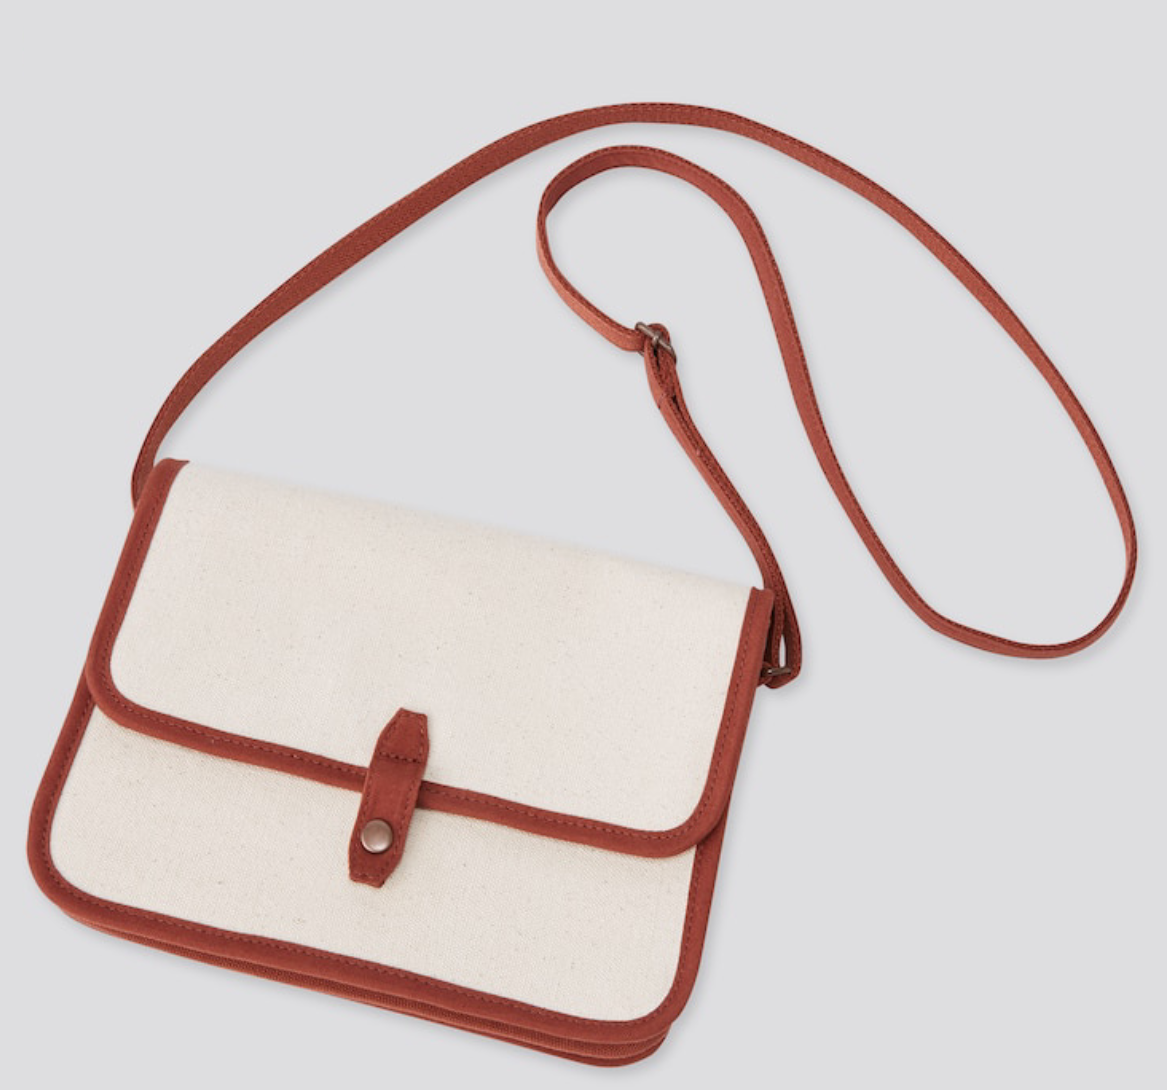 5 Best Shoulder Bags for Spring - Shopping and Info